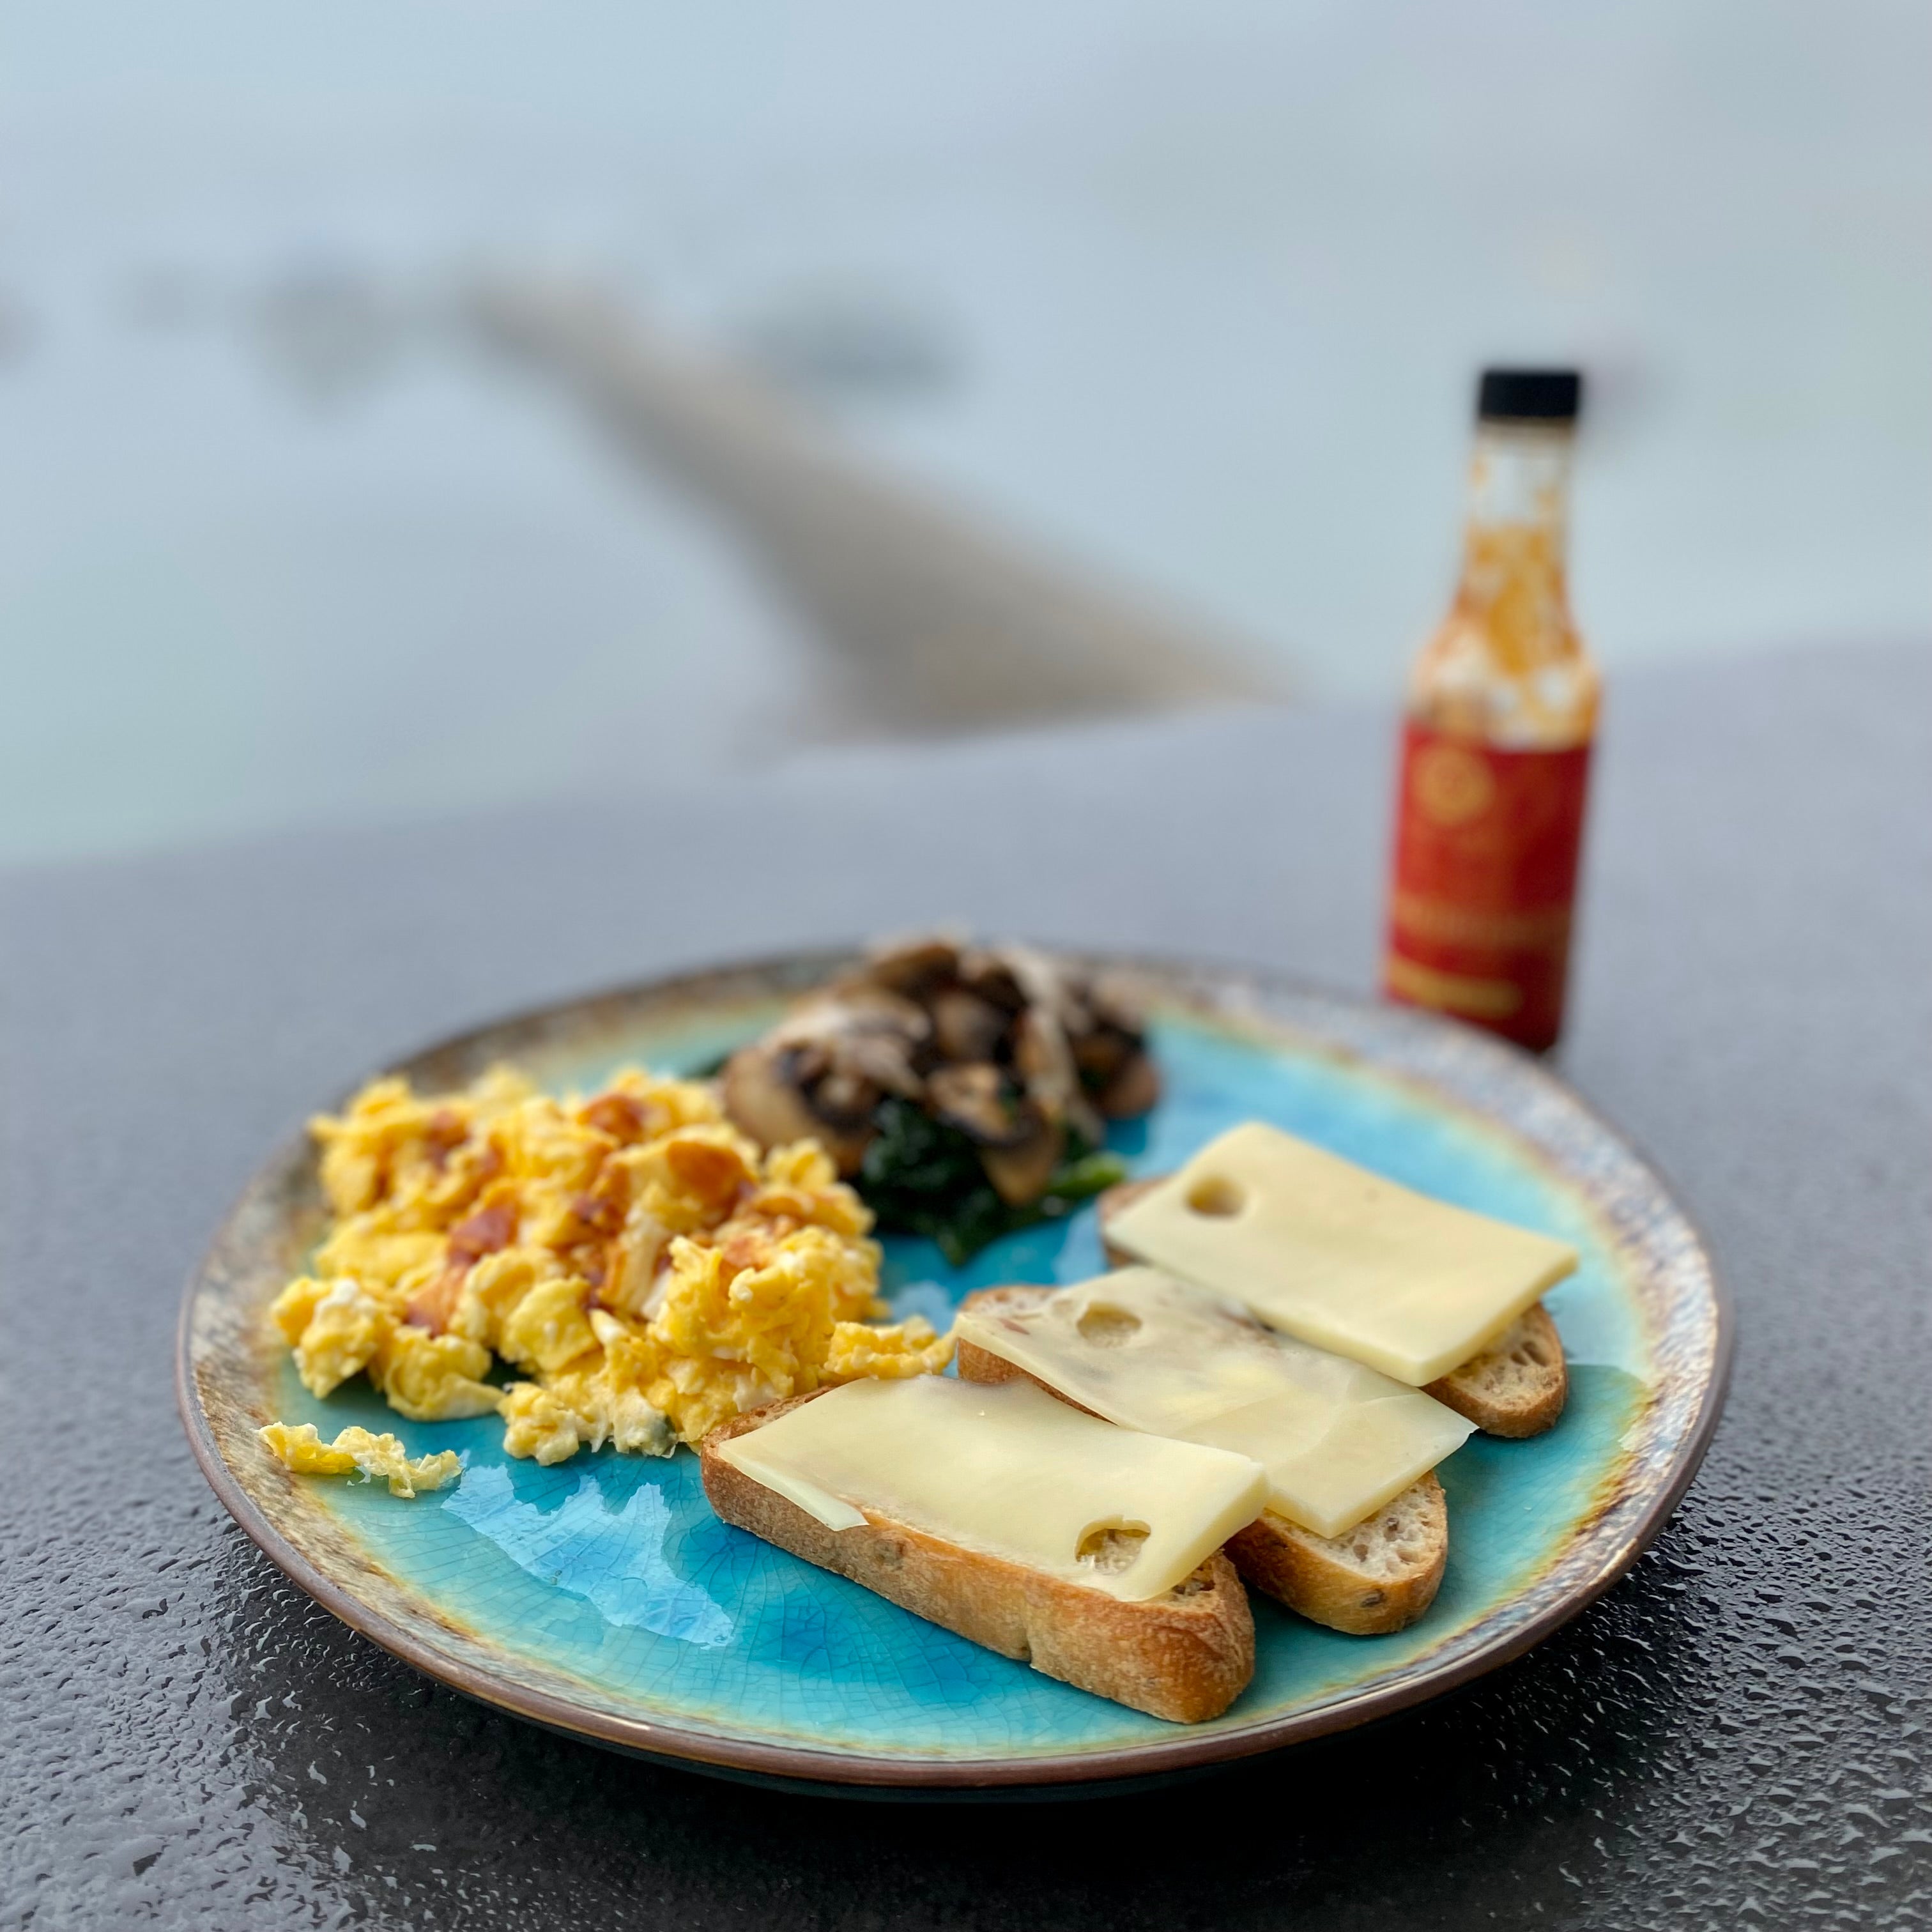 A bottle of Alchemy Kitchen Llama Drama hot sauce with cheese toast and eggs